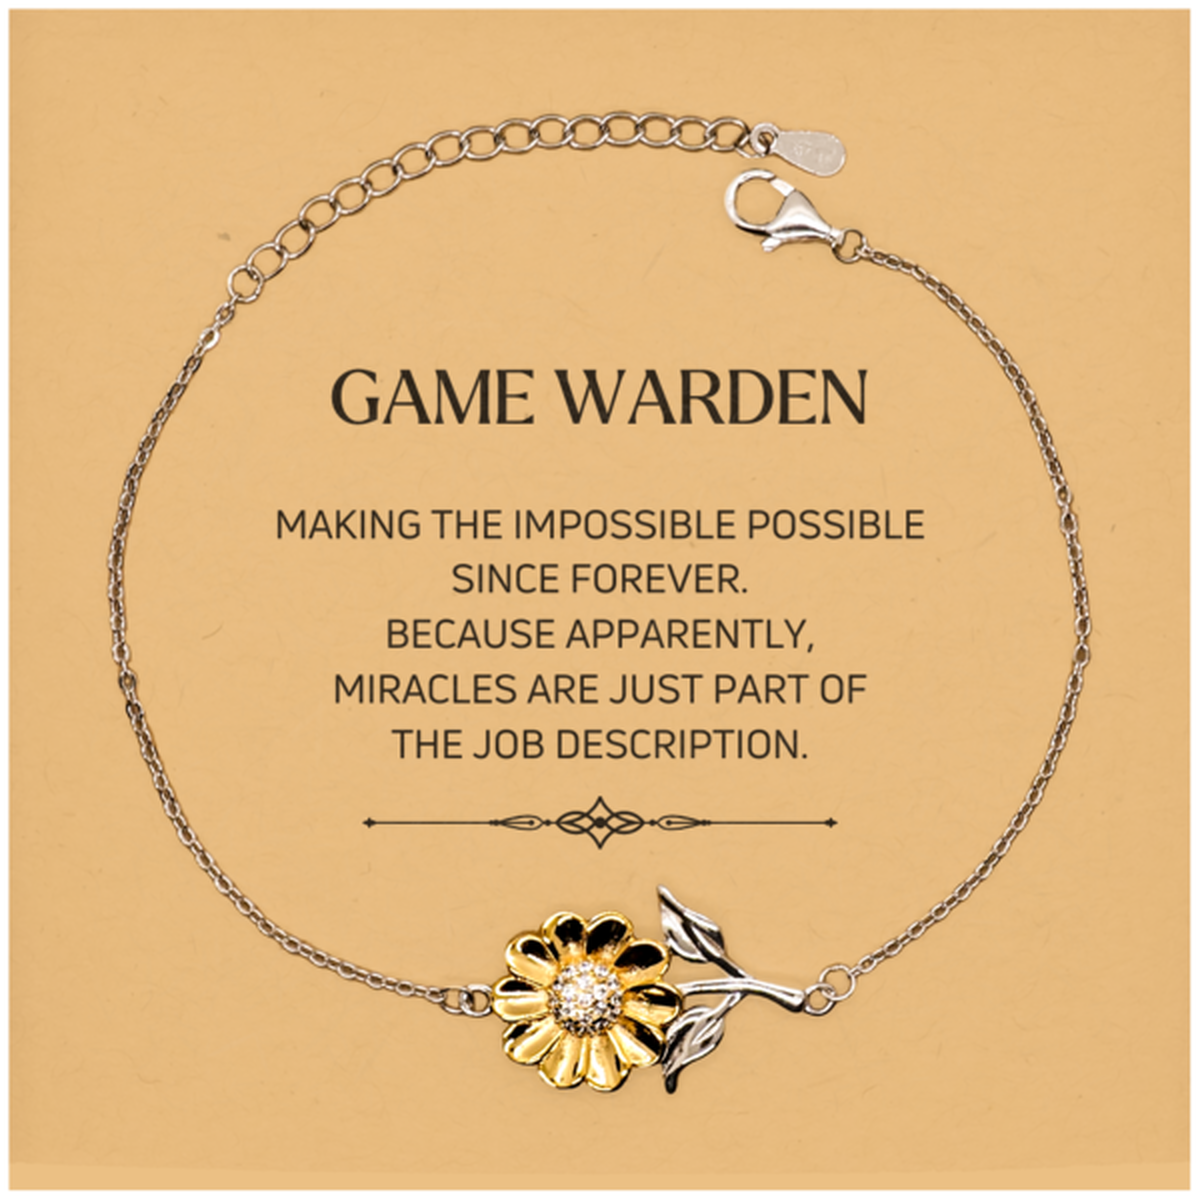 Funny Game Warden Gifts, Miracles are just part of the job description, Inspirational Birthday Christmas Sunflower Bracelet For Game Warden, Men, Women, Coworkers, Friends, Boss